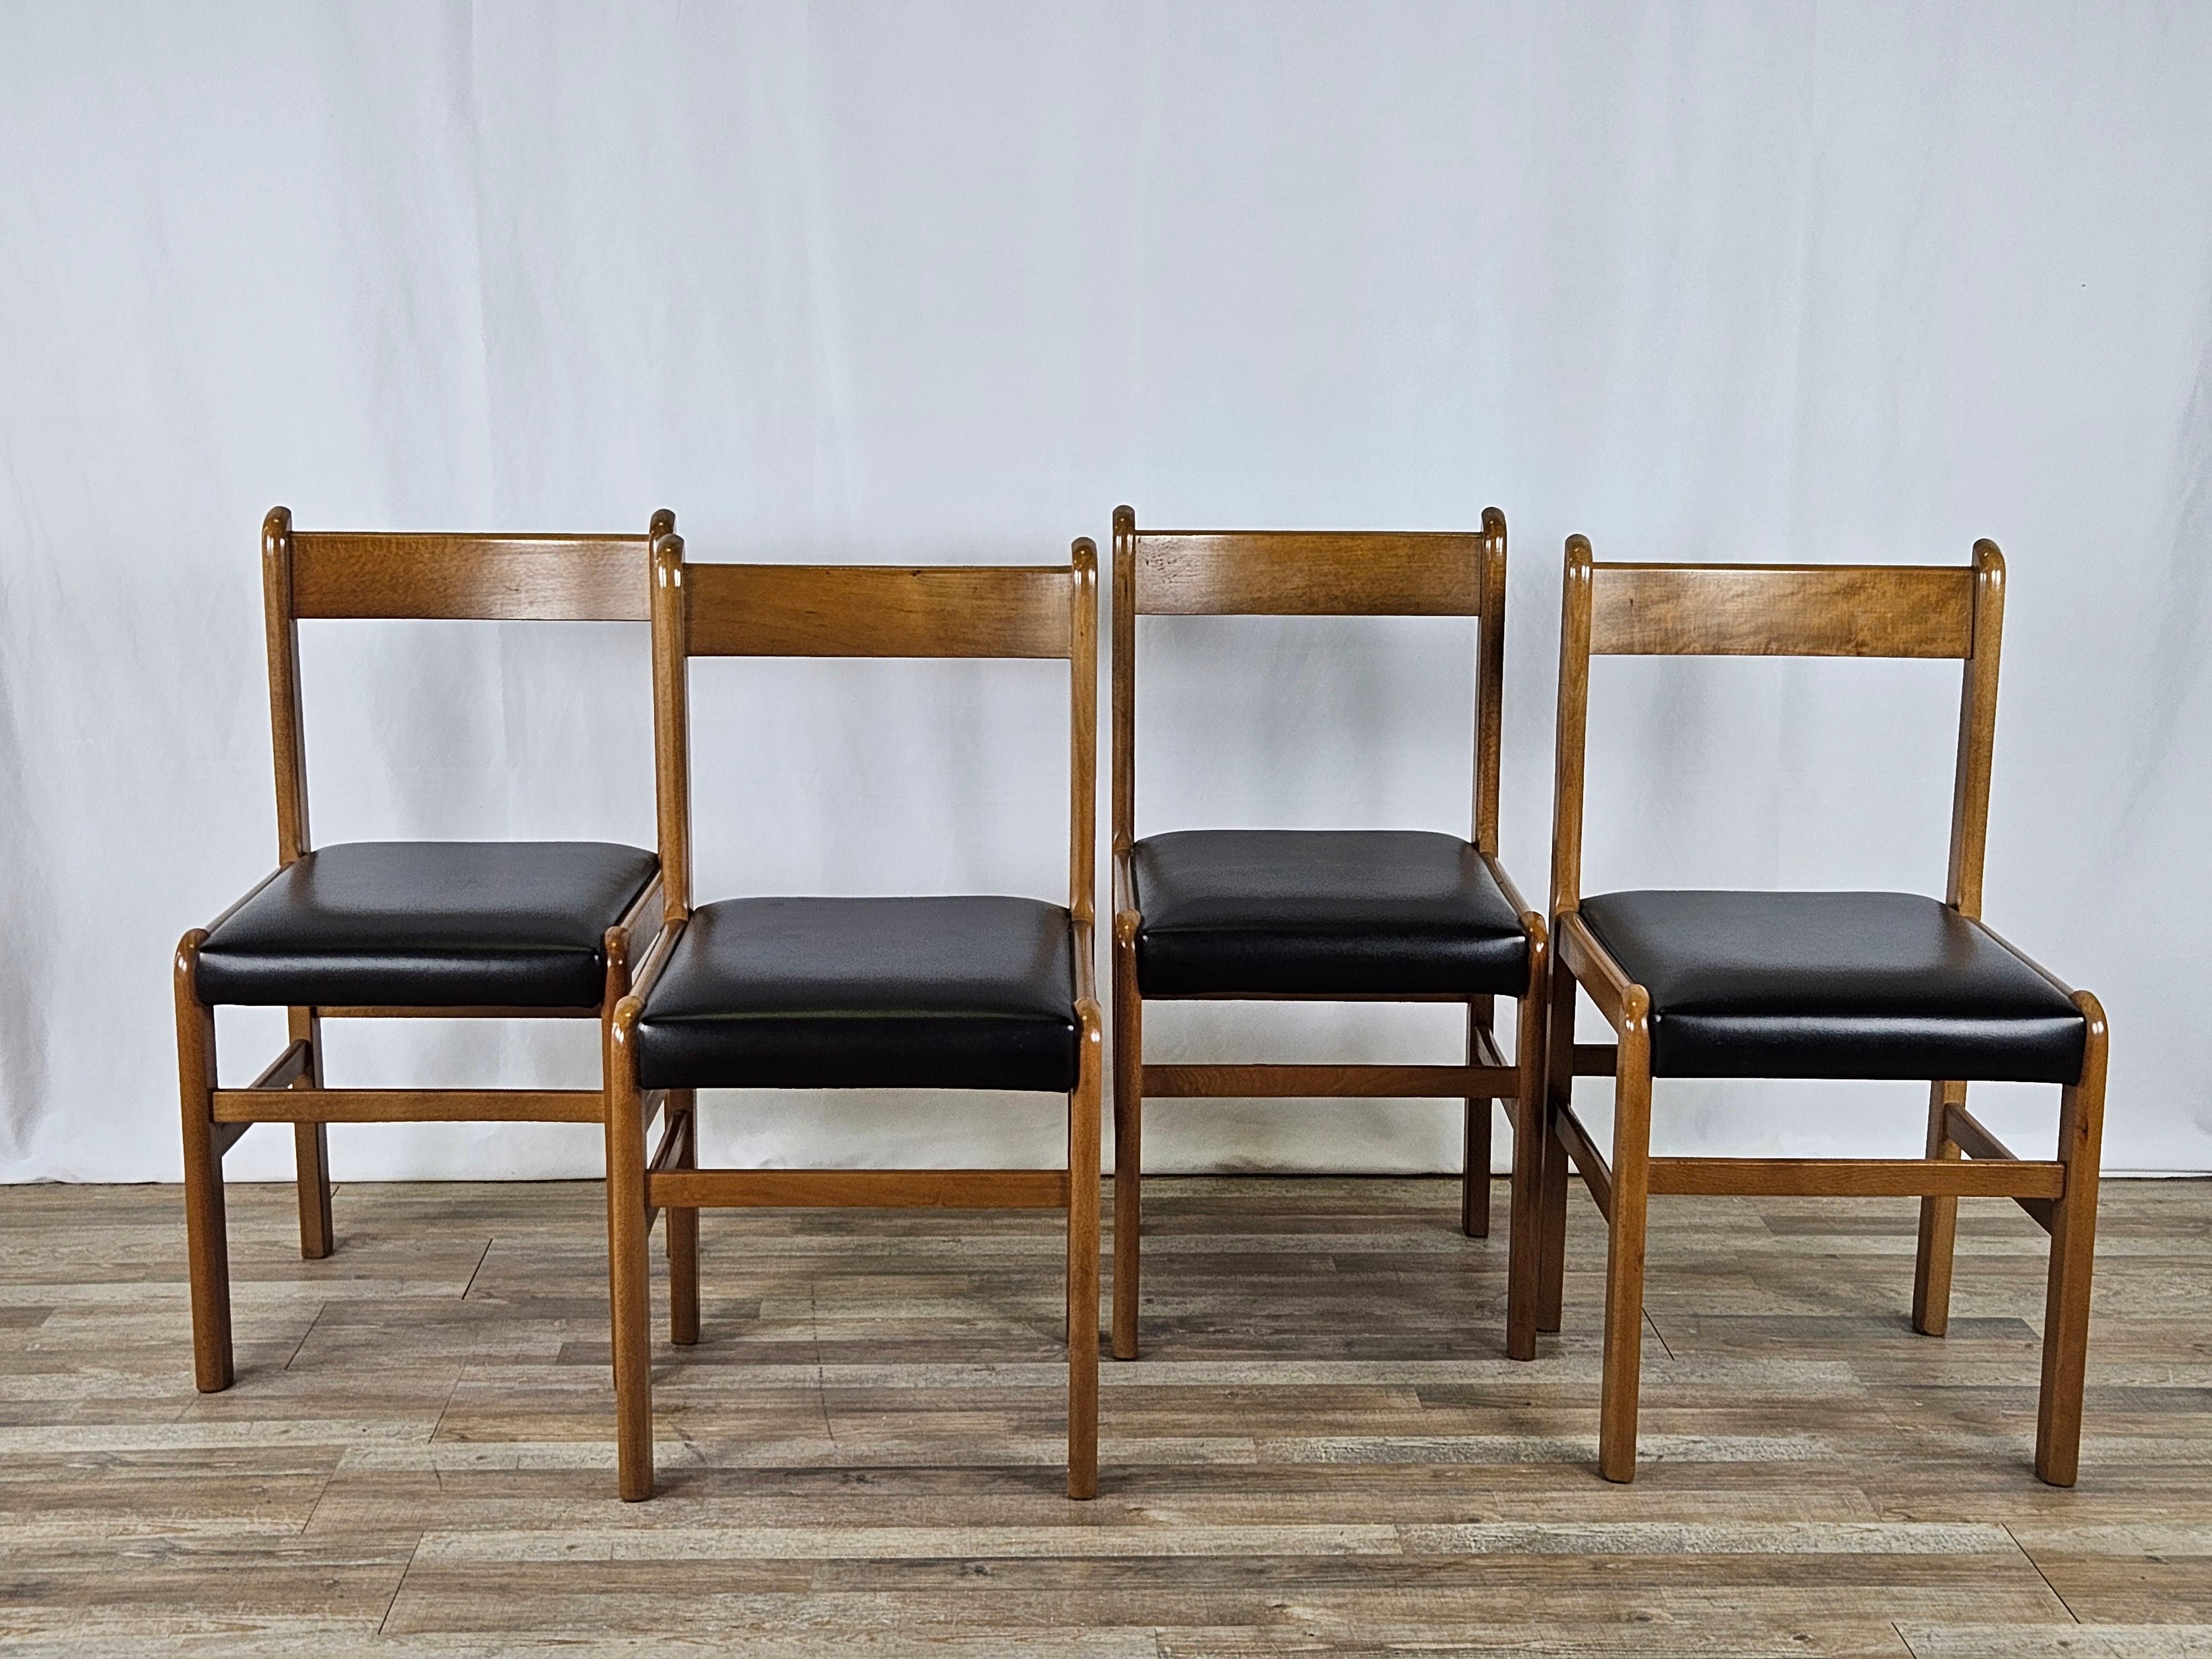 Beechwood office or waiting room chairs with comfortable black leather upholstered seat.

The chairs are a high-quality Italian production, dating from the early 1970s.

They show normal signs due to age and use, the wood is present in virtually